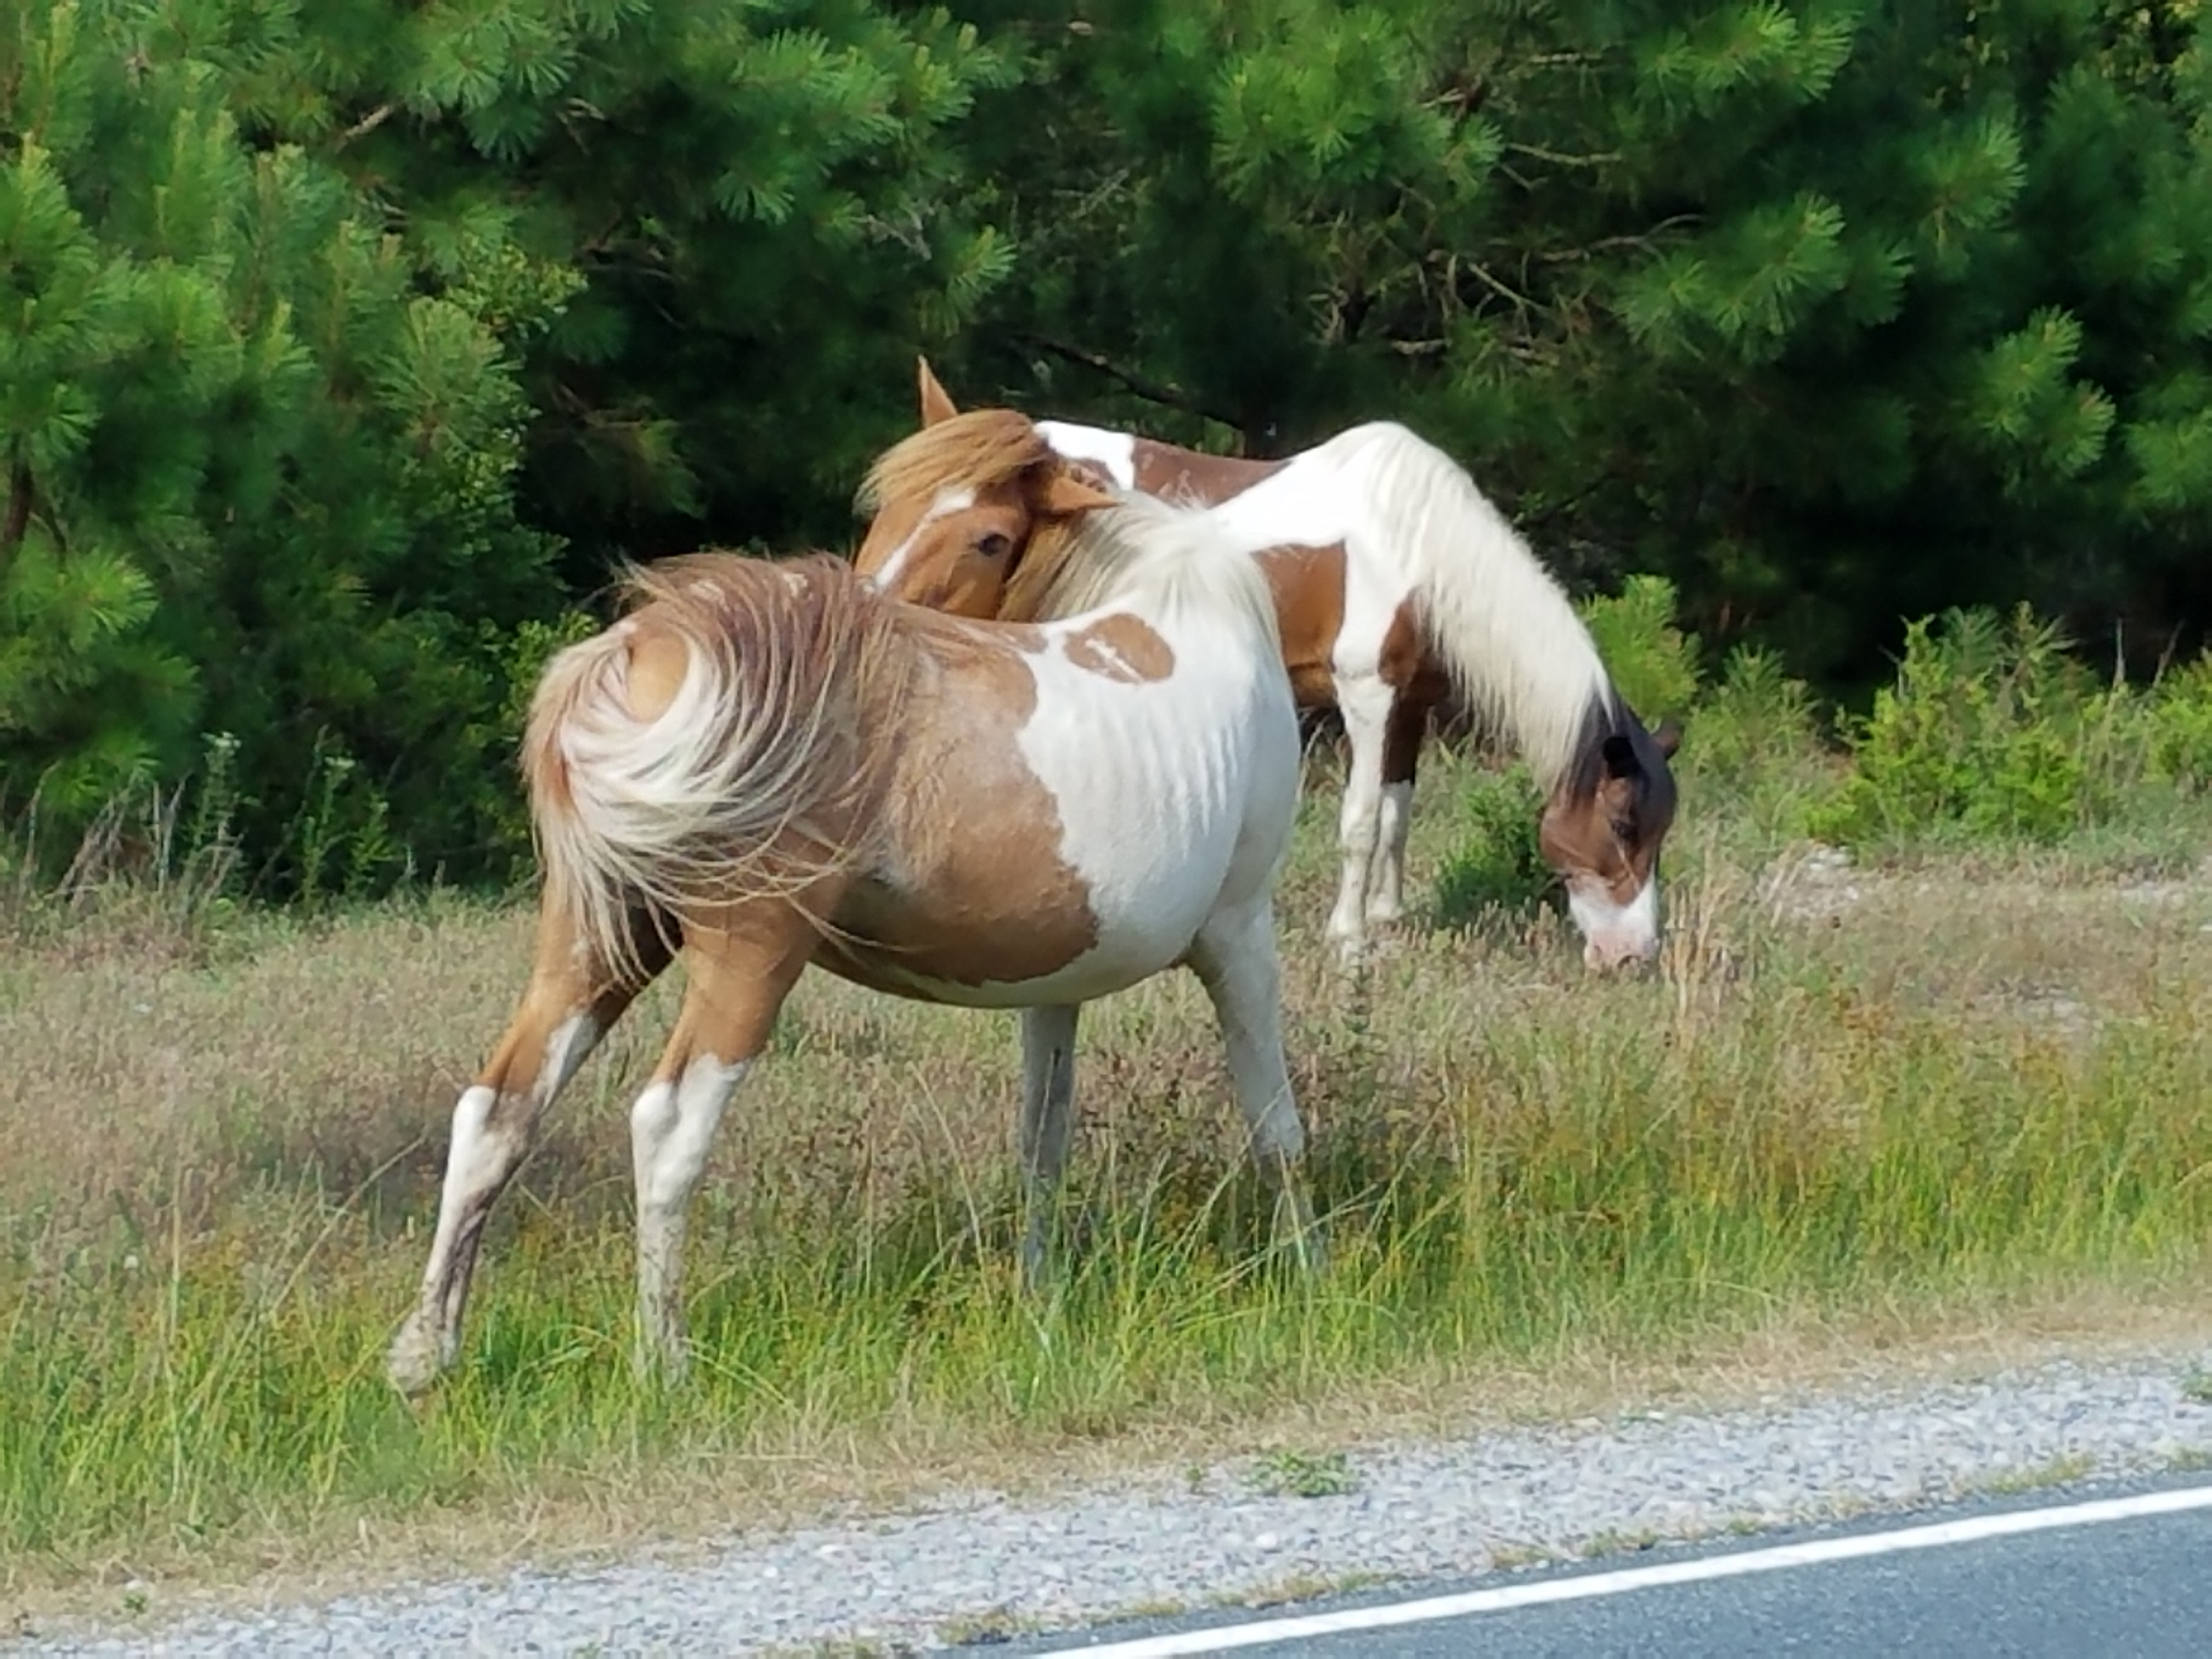 Assateague Island is known for the wild horses that roam the island. There is also enjoy swimming, camping, kayaking, paddle board, or wind surfing and more